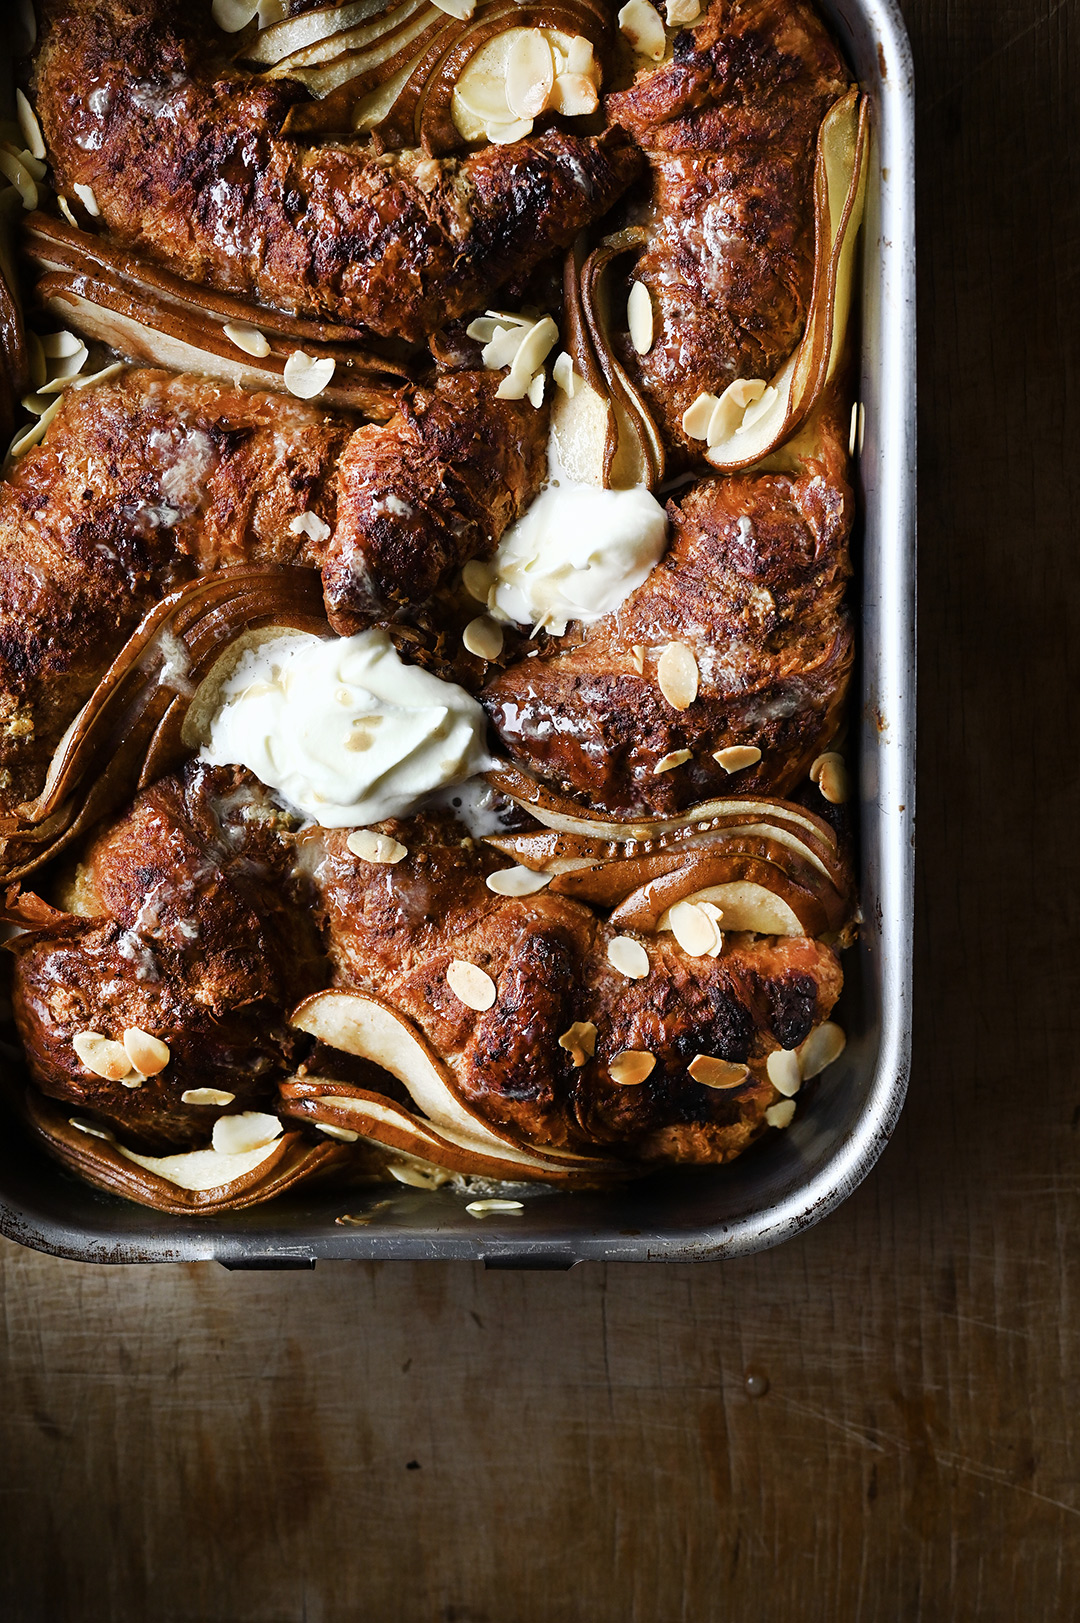 serving dumplings | Overnight pear and ricotta croissant French toast with almonds